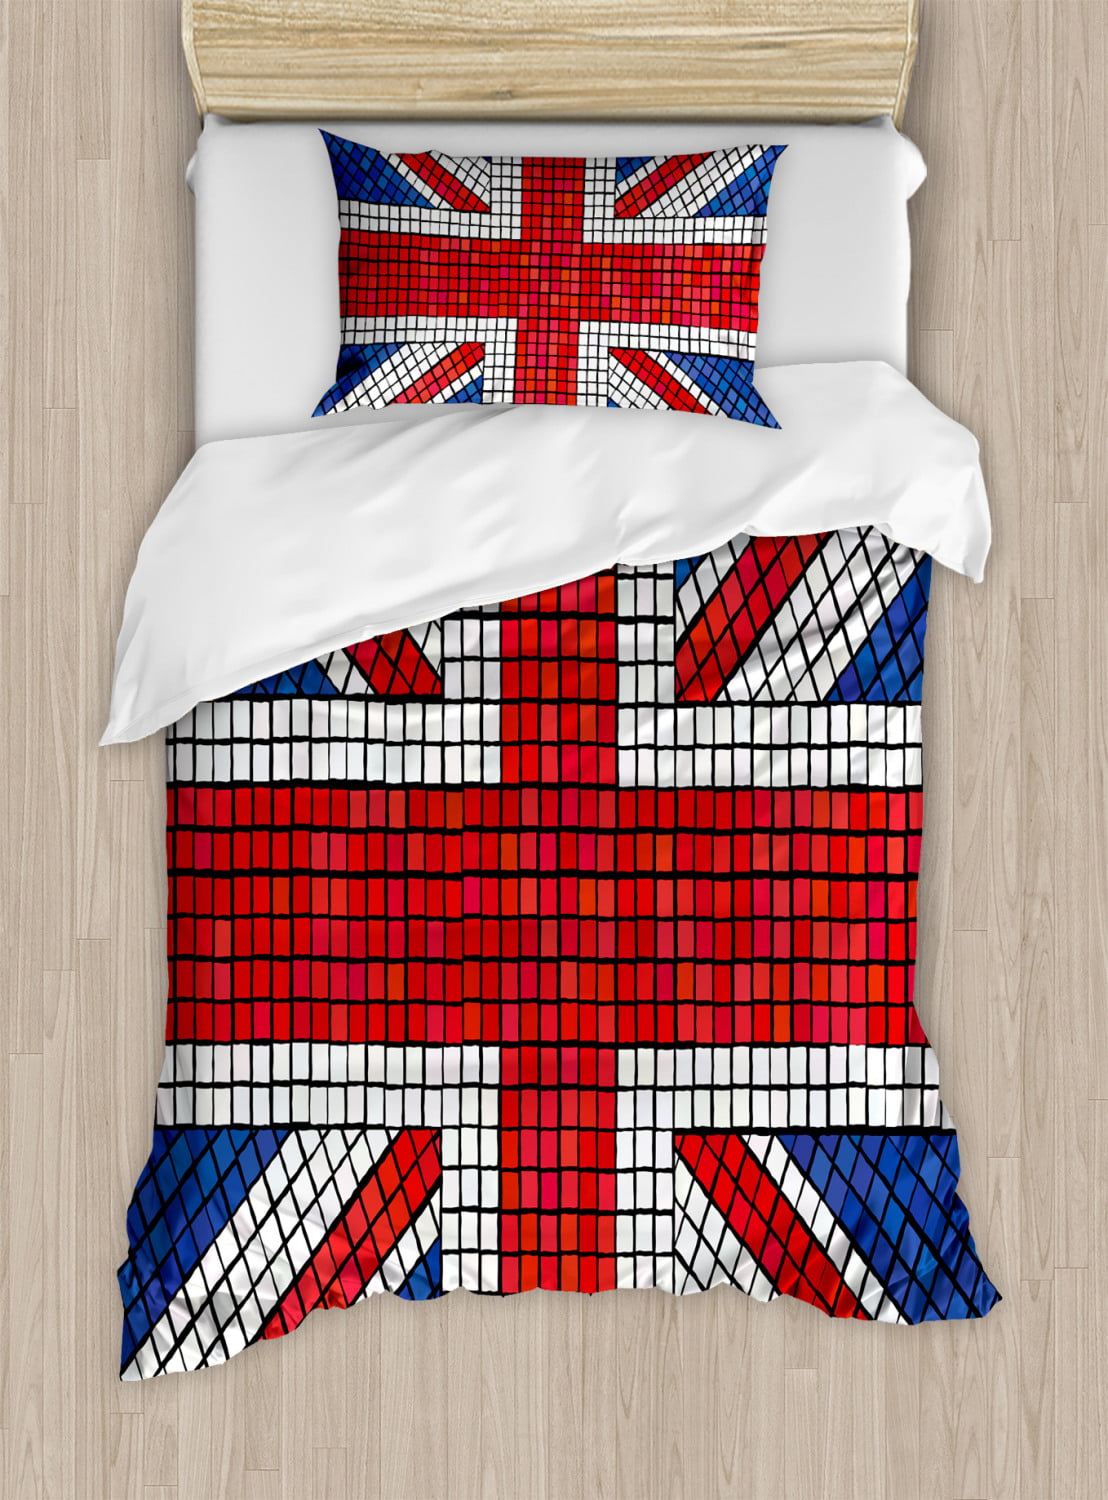 AYZ England Union Jack Printed Duvet and Pillow Cover Bedding Set